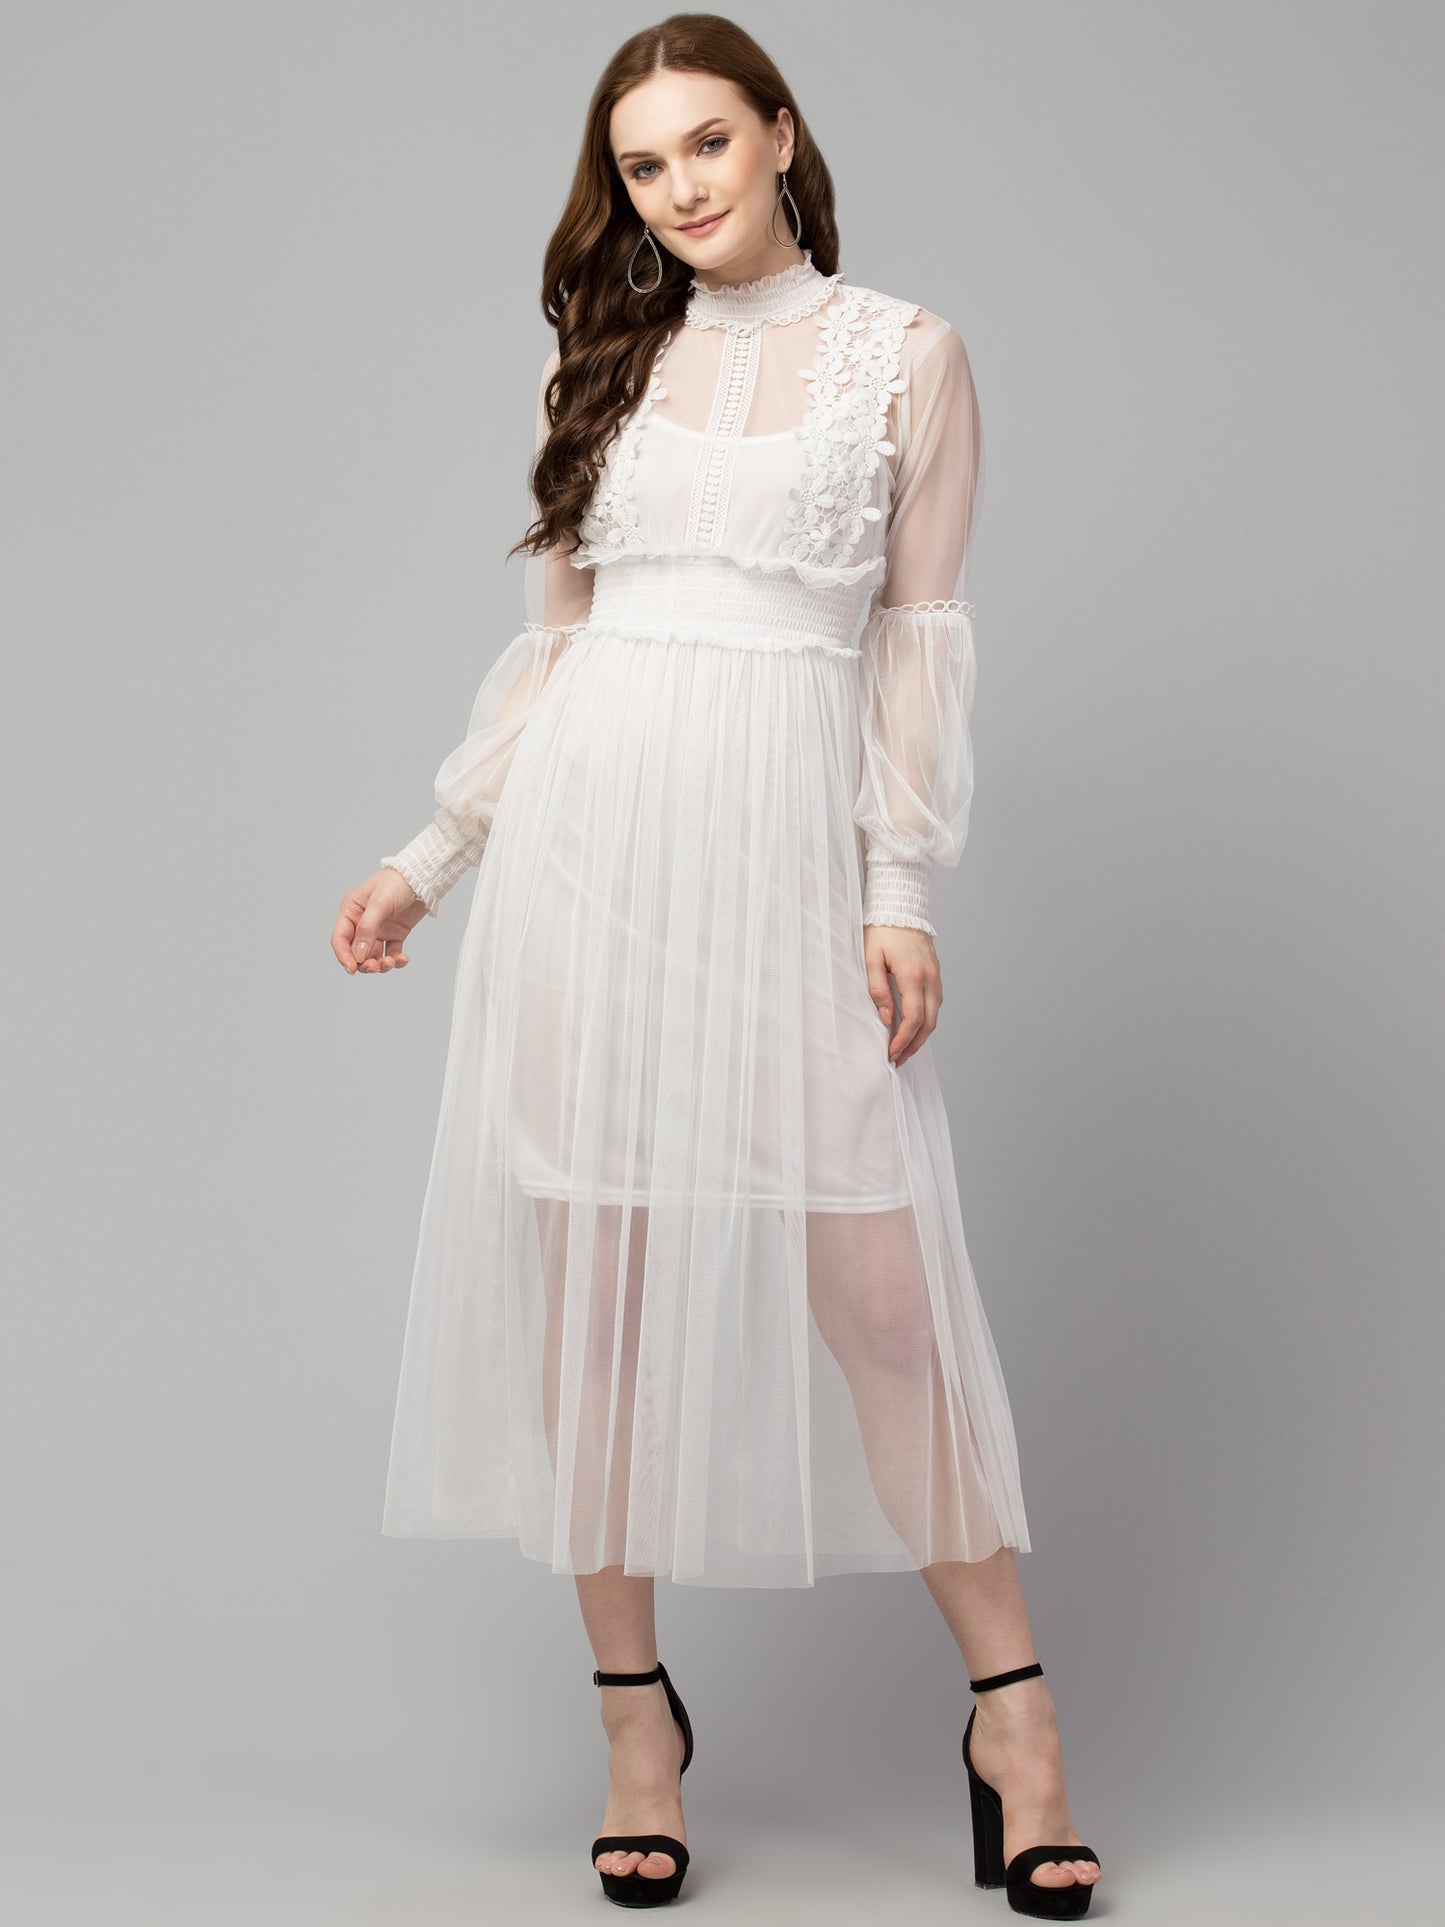 White Lace Net Dress With Lining